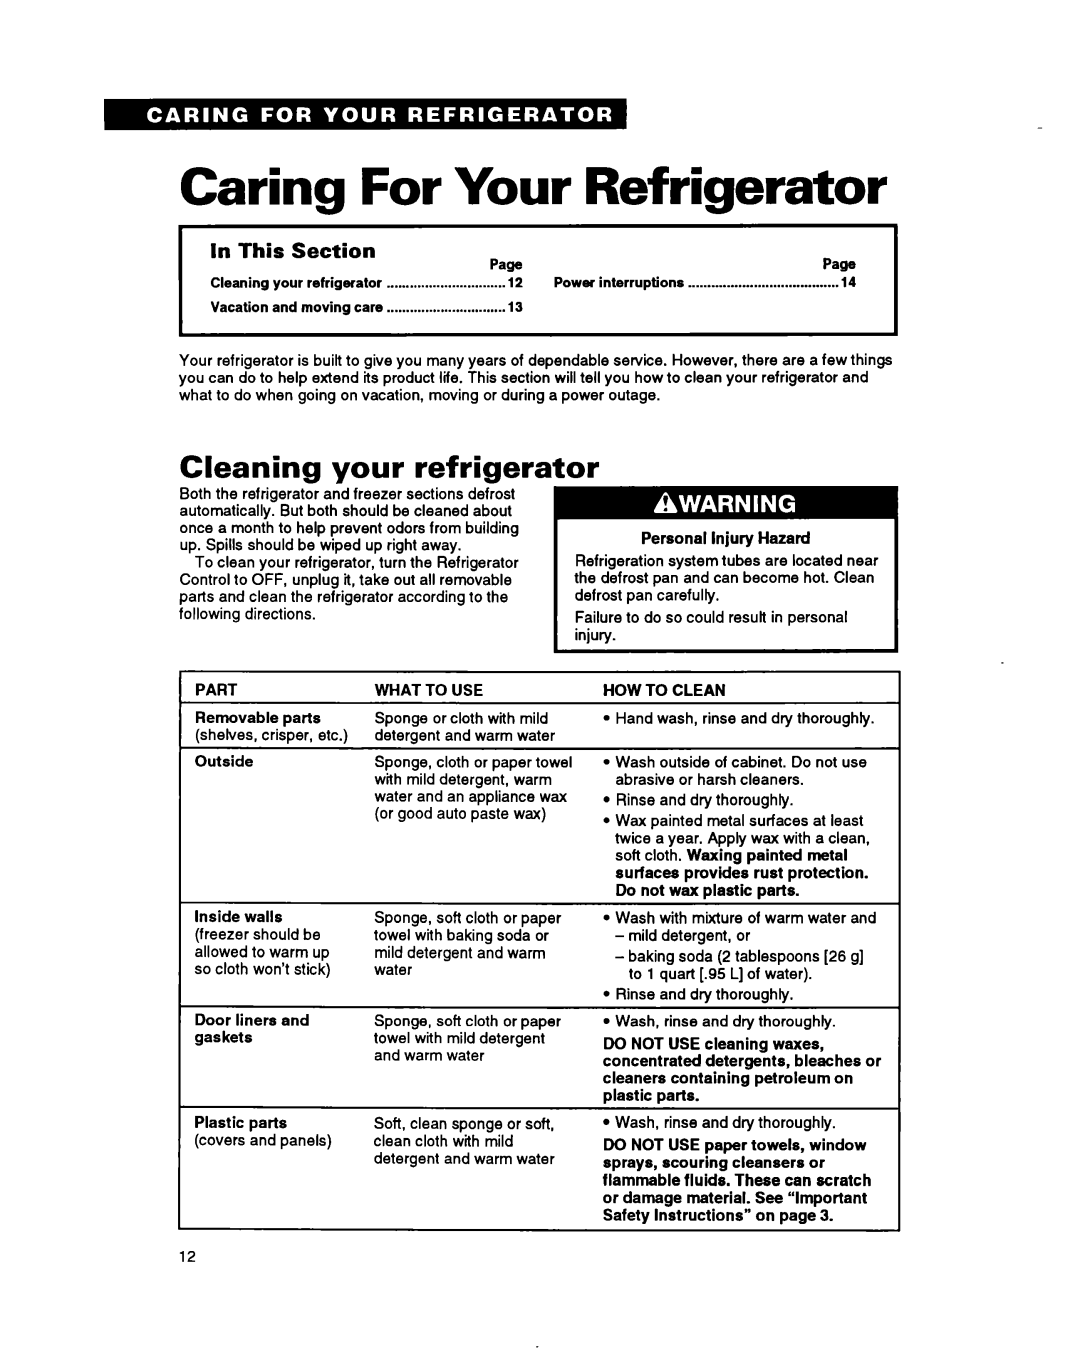 Whirlpool RTIZDK Caring For Your Refrigerator, Cleaning your refrigerator, In This, Section, Page 